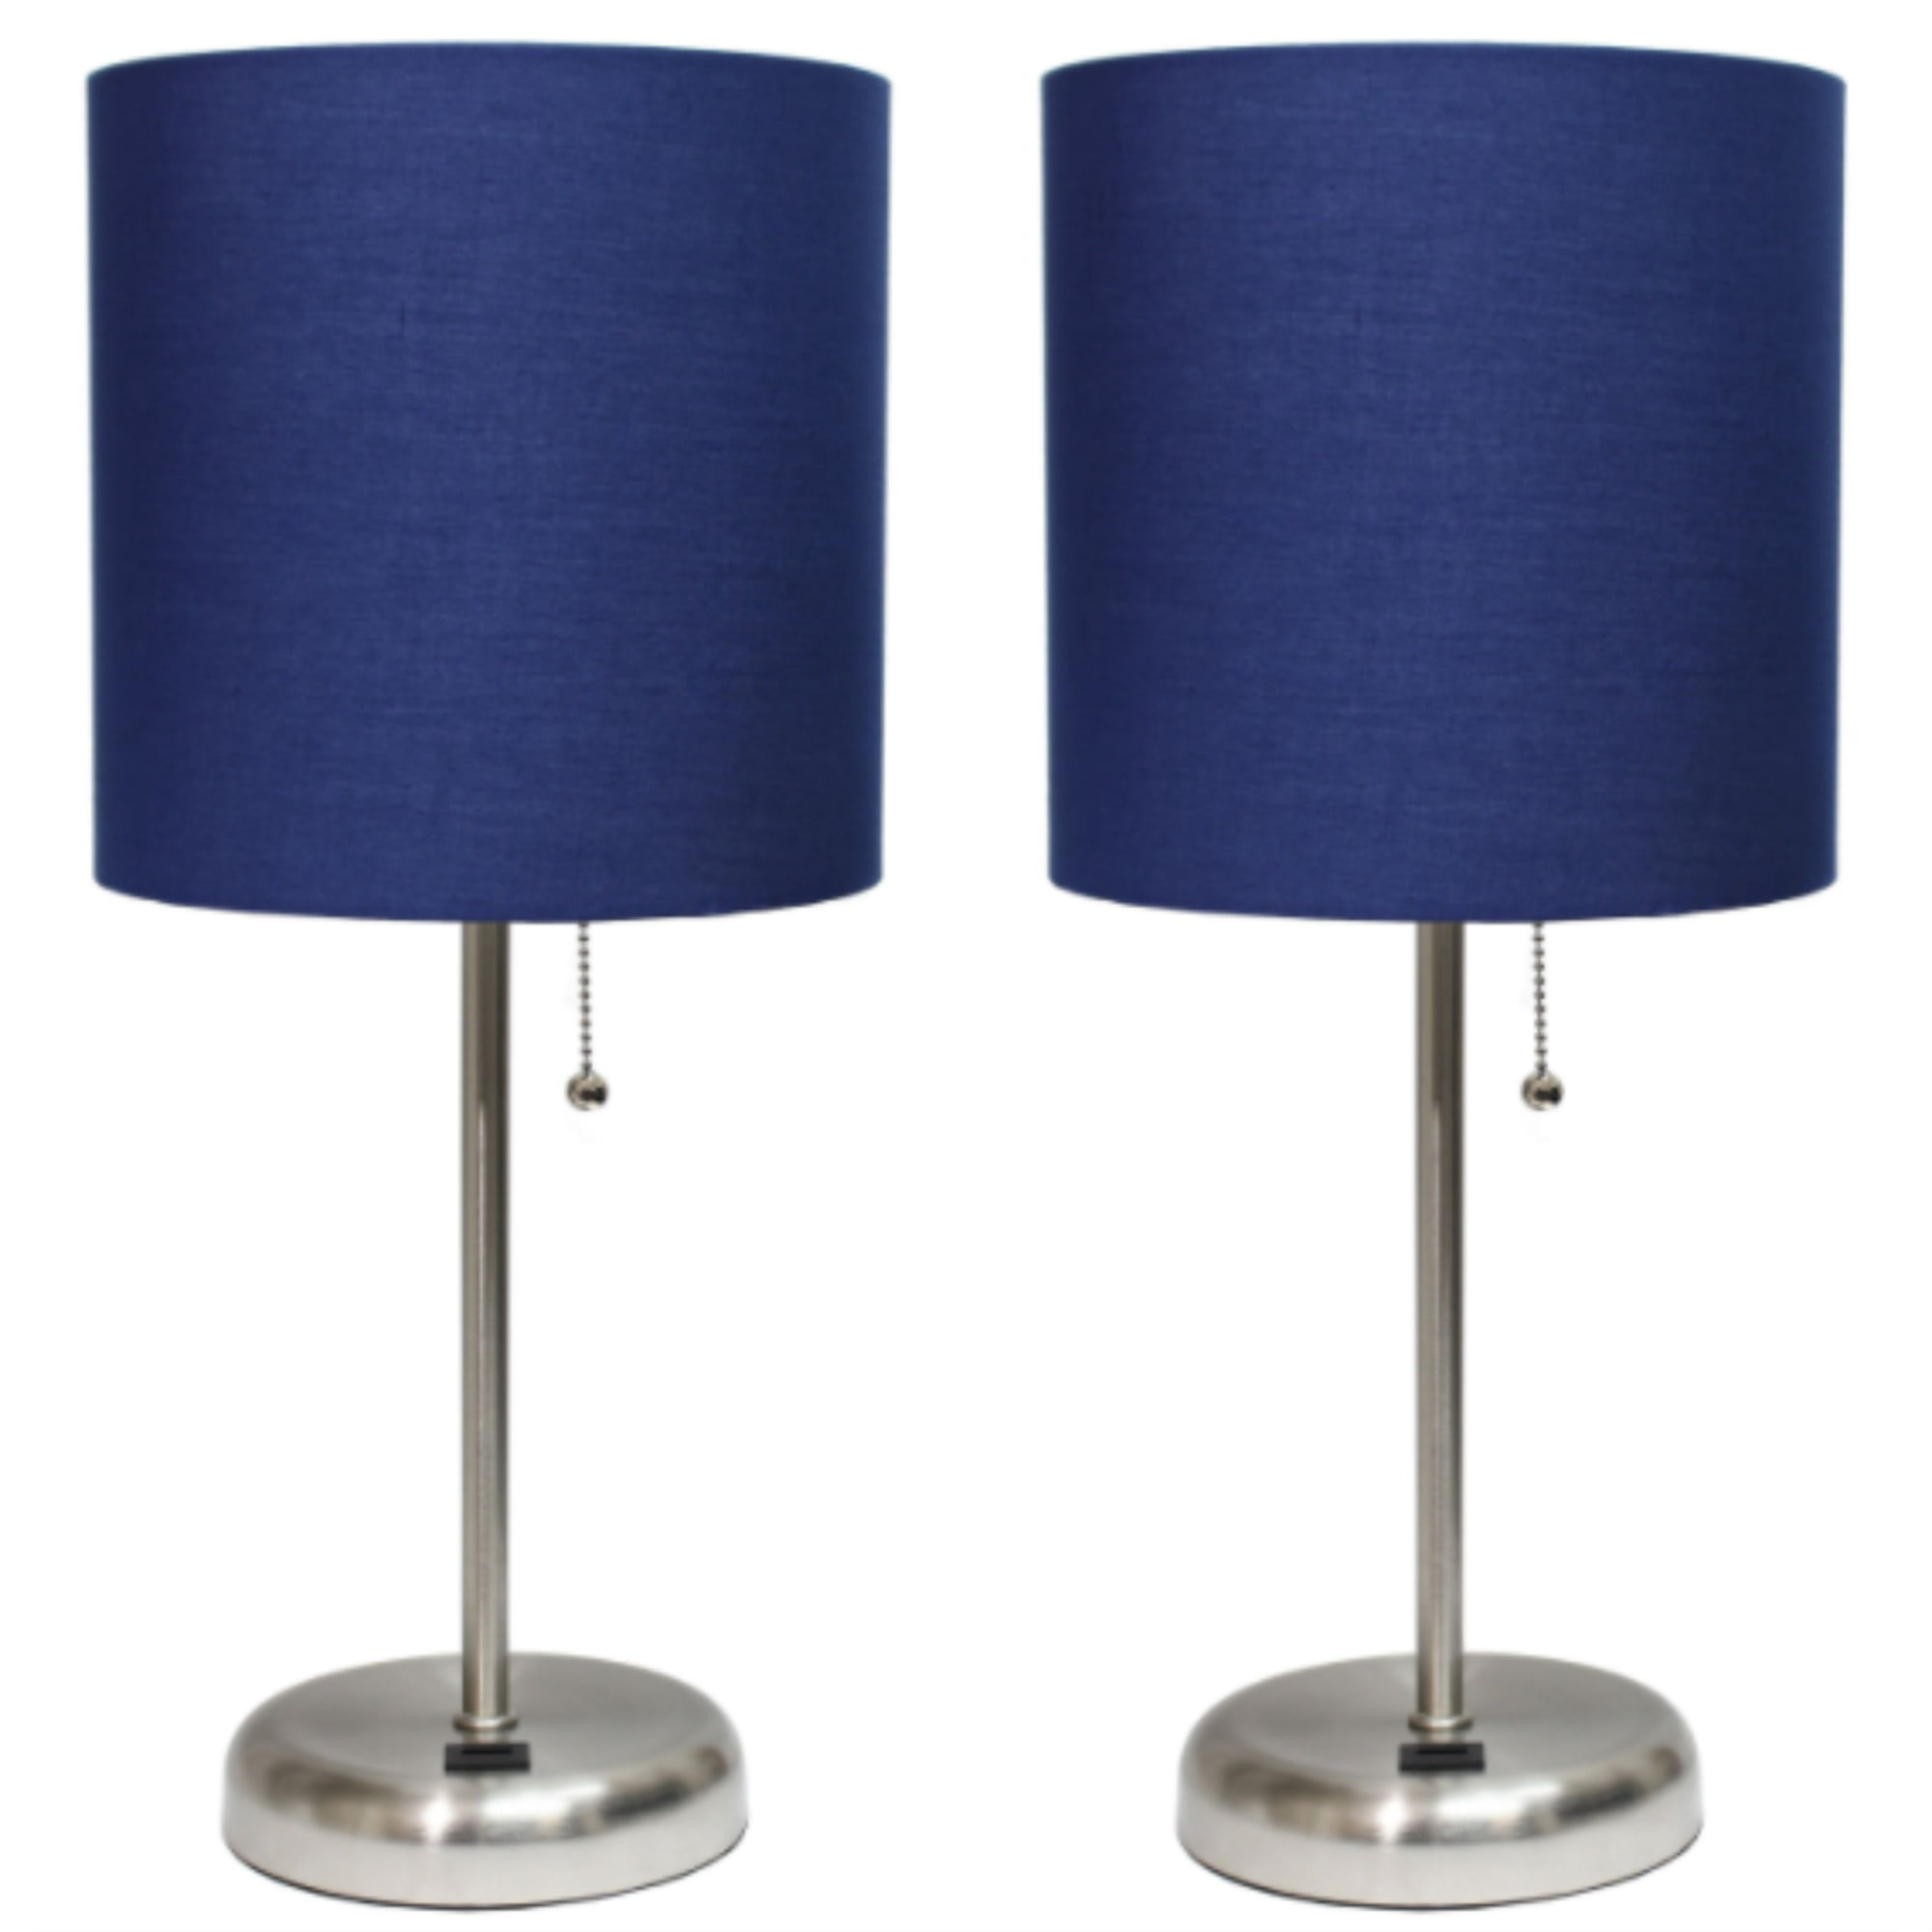 LimeLights Stick Lamp with USB charging port and Fabric Shade 2 Pack Set, Navy 